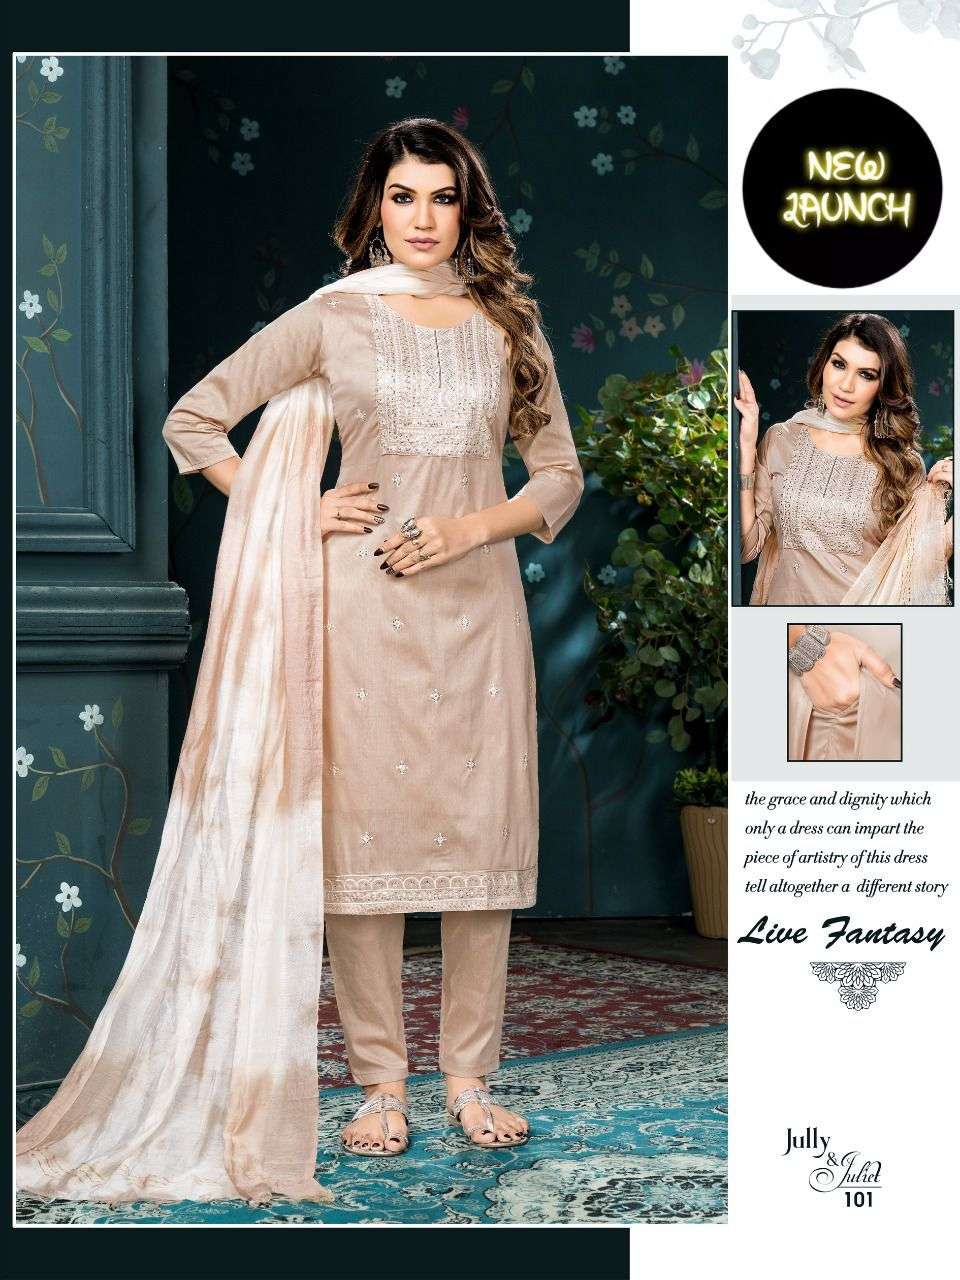 S3forever jully%20And%20Juliet fabric silk embroidery work white foil print kurti silk fabric fancy pant chiffon double dying dupatta 01 0 2022 10 15 16 21 51